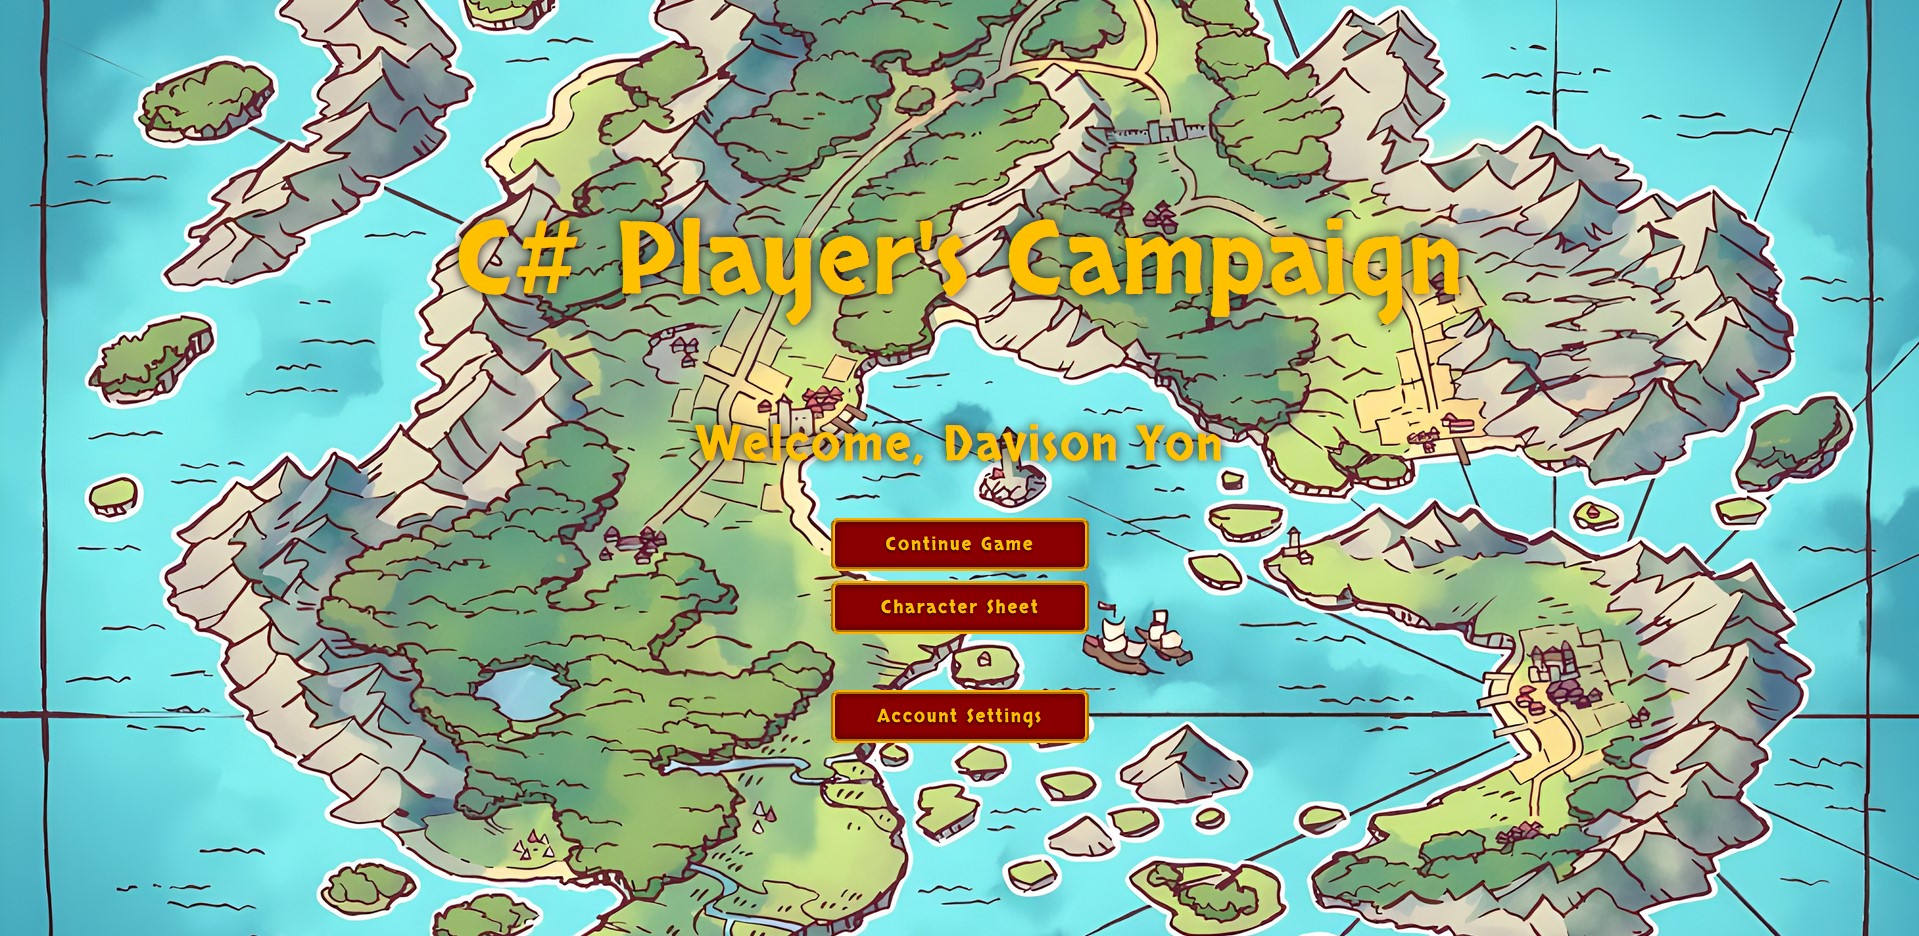 C# Player's Campaign